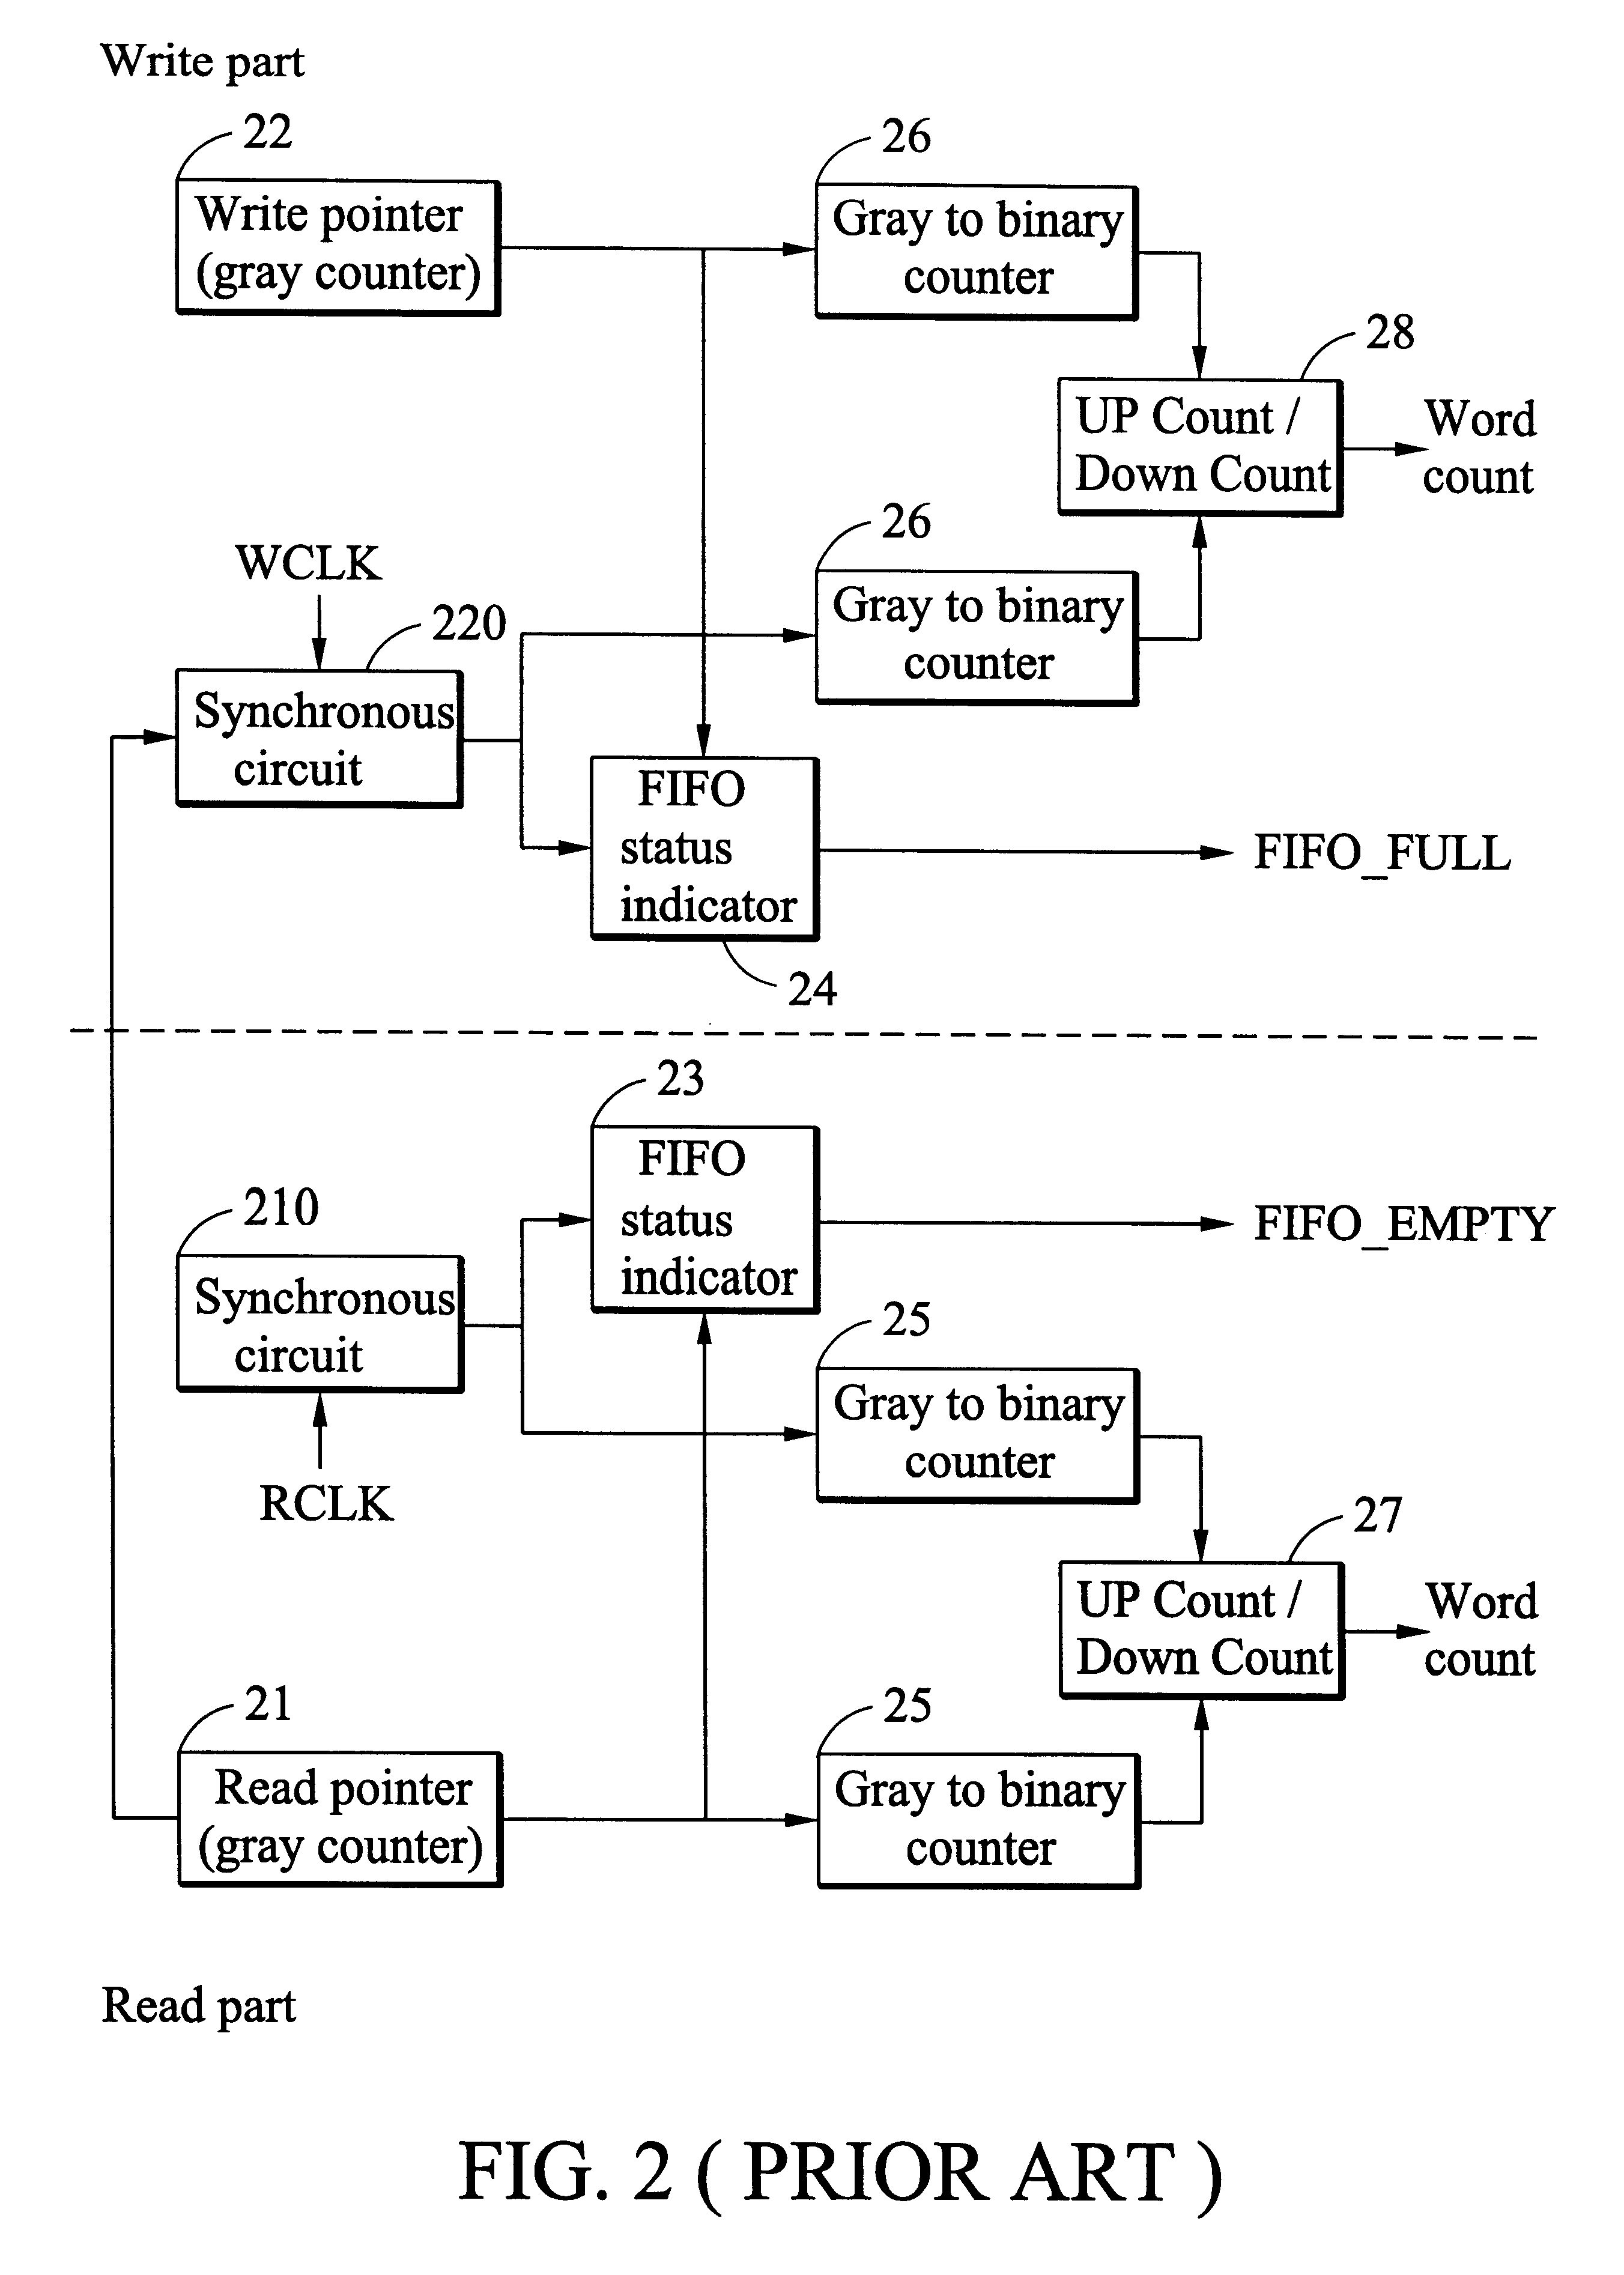 Apparatus and method of asynchronous FIFO control